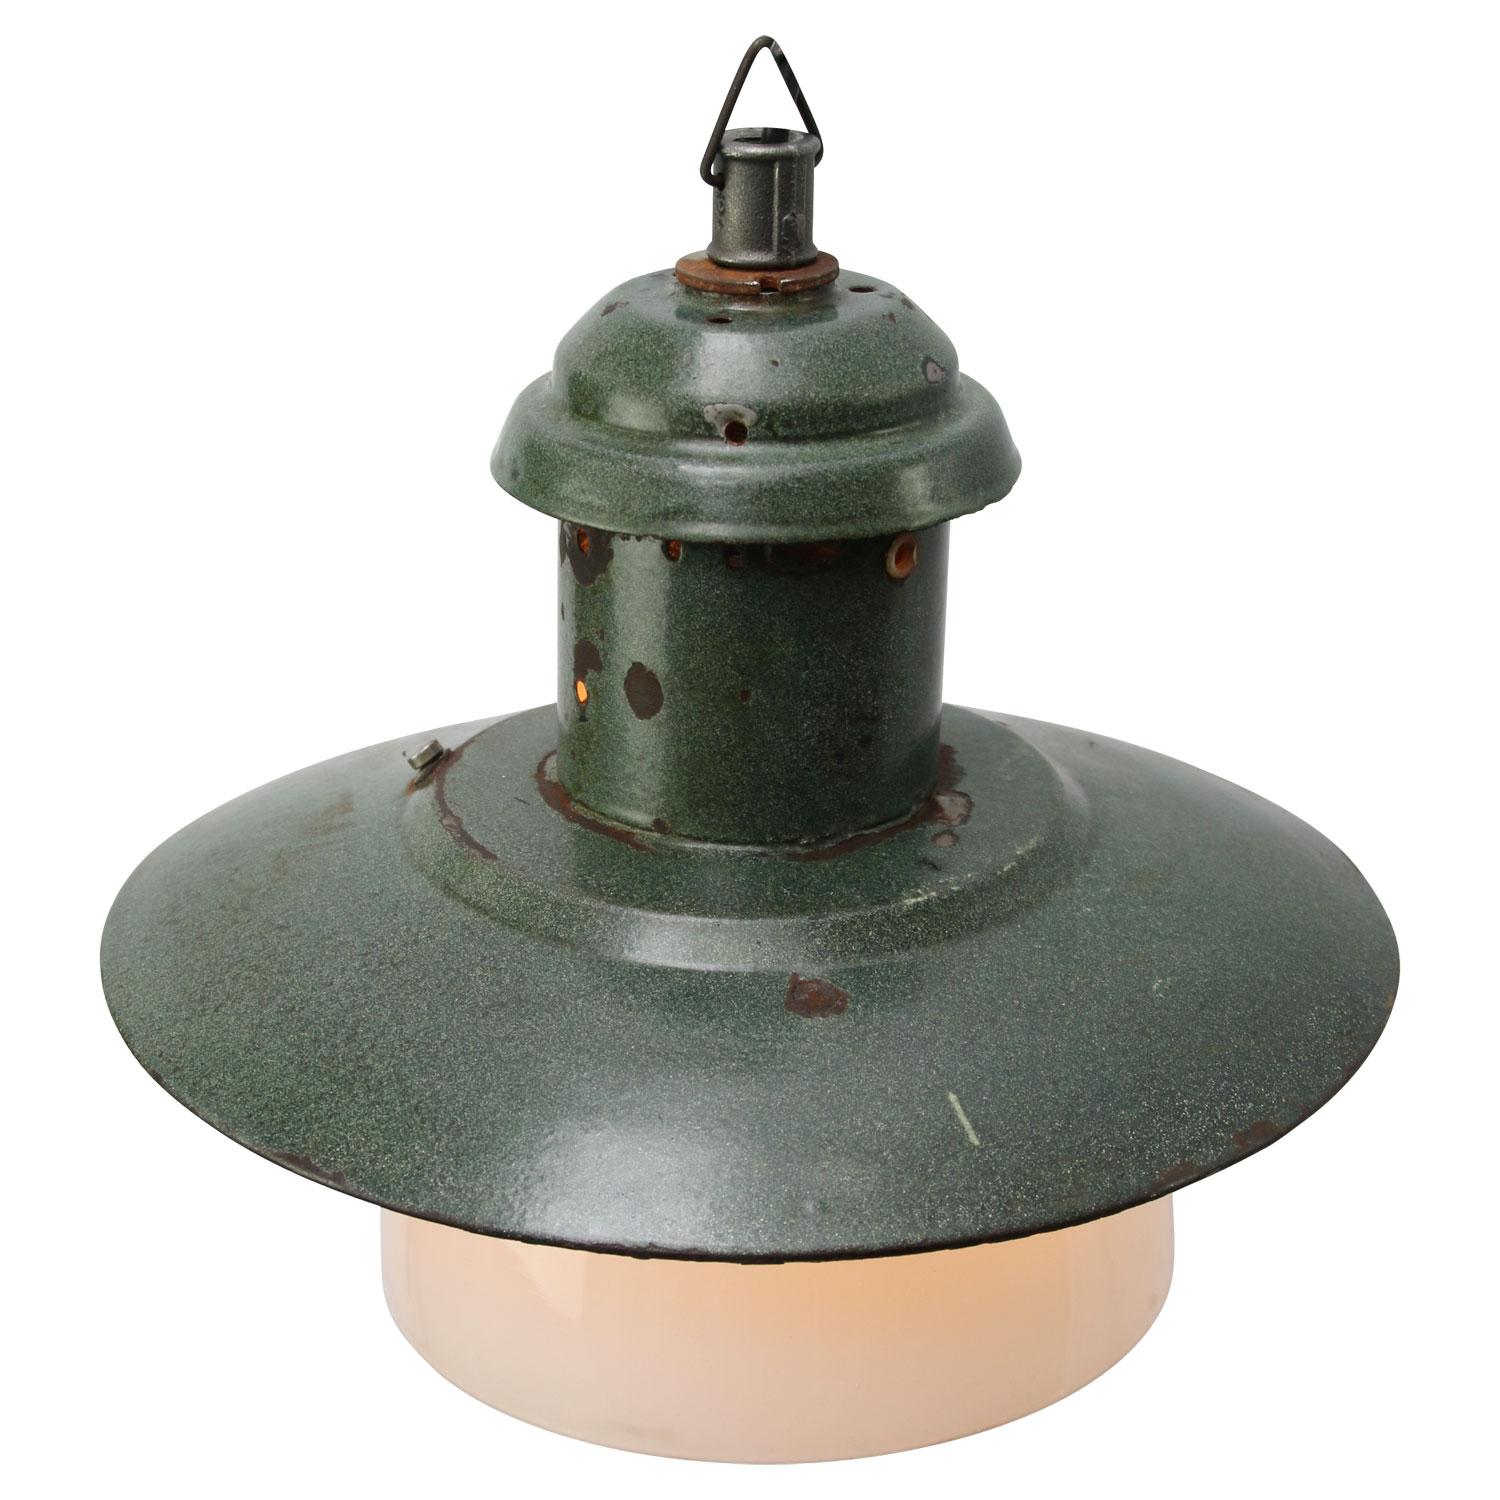 Old green enamel factory pendant.
White inside. White opaline glass

Measure: Diameter glass 21 cm

Weight: 2.20 kg / 4.9 lb

Priced per individual item. All lamps have been made suitable by international standards for incandescent light